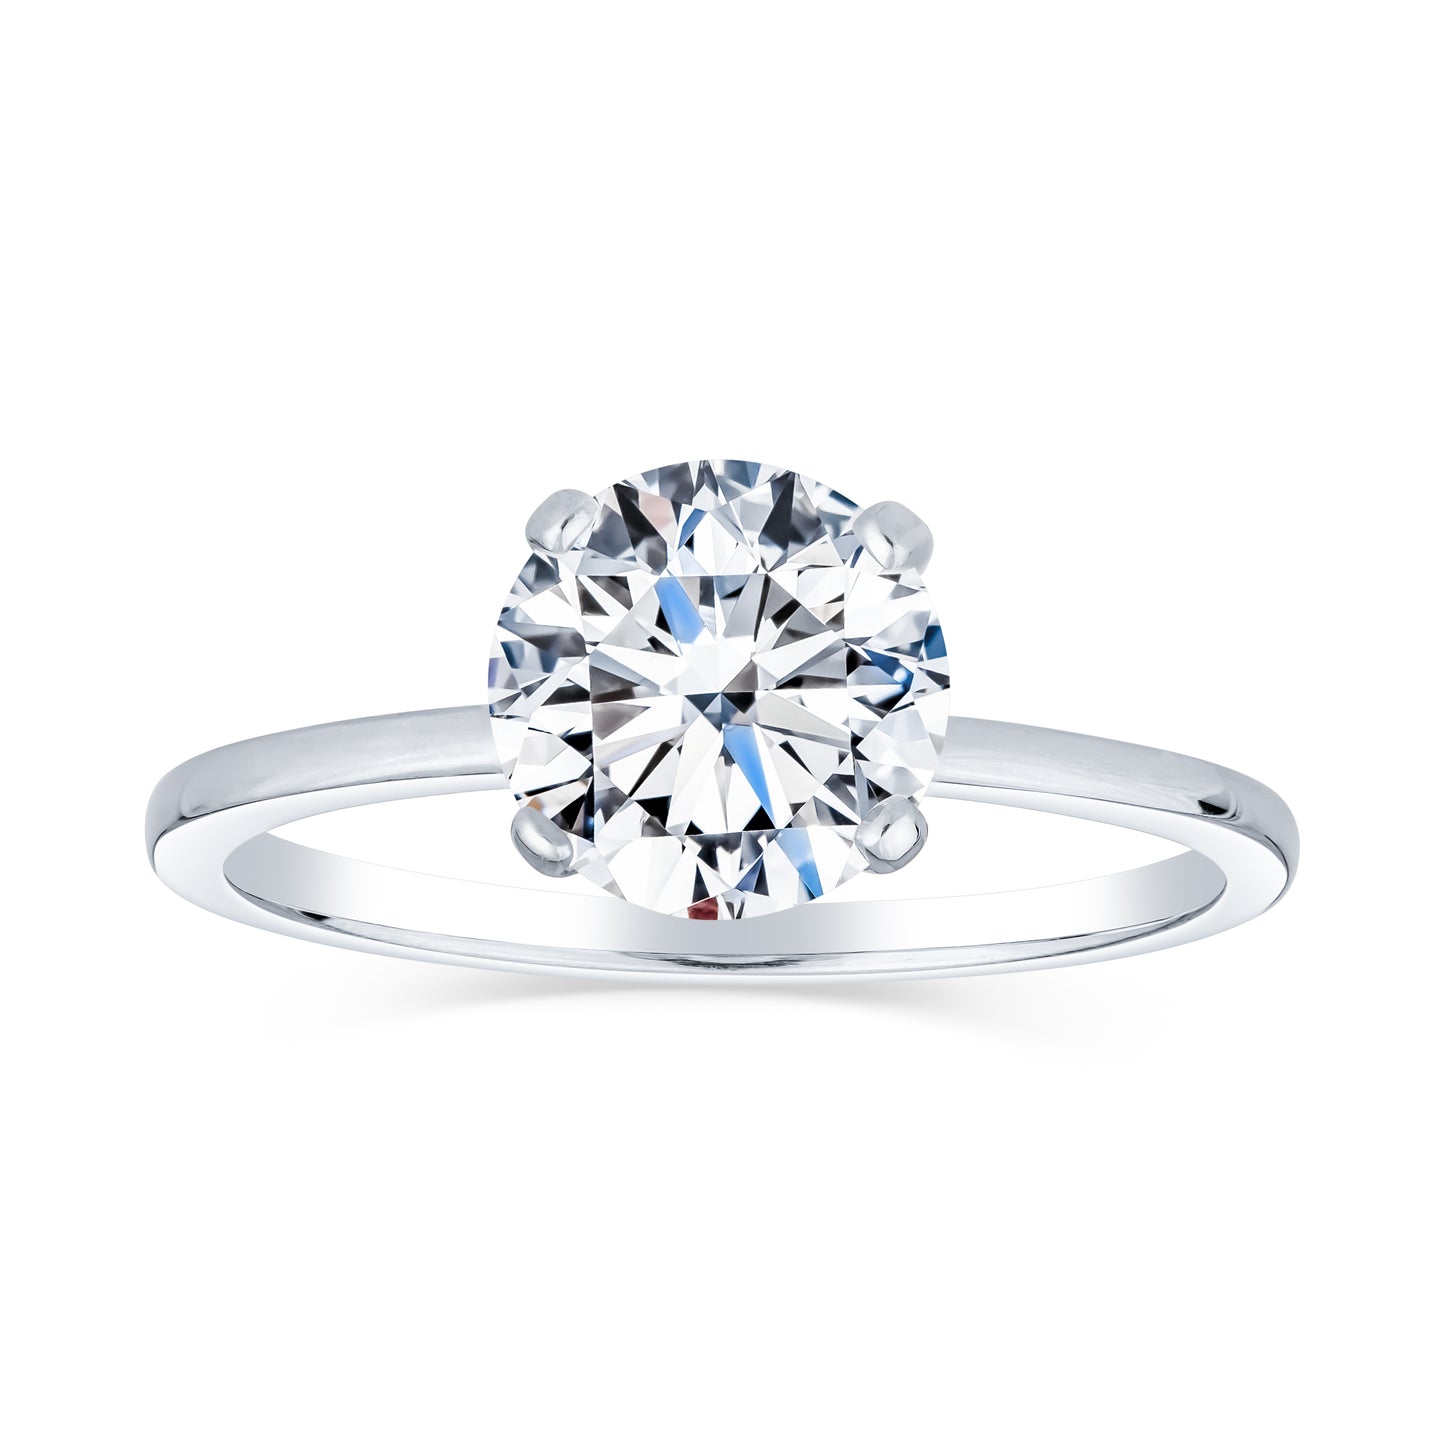 solitaire engagement rings, simple engagement rings,traditional engagement rings, classic engagement rings, round solitaire engagement rings, gold solitaire rings